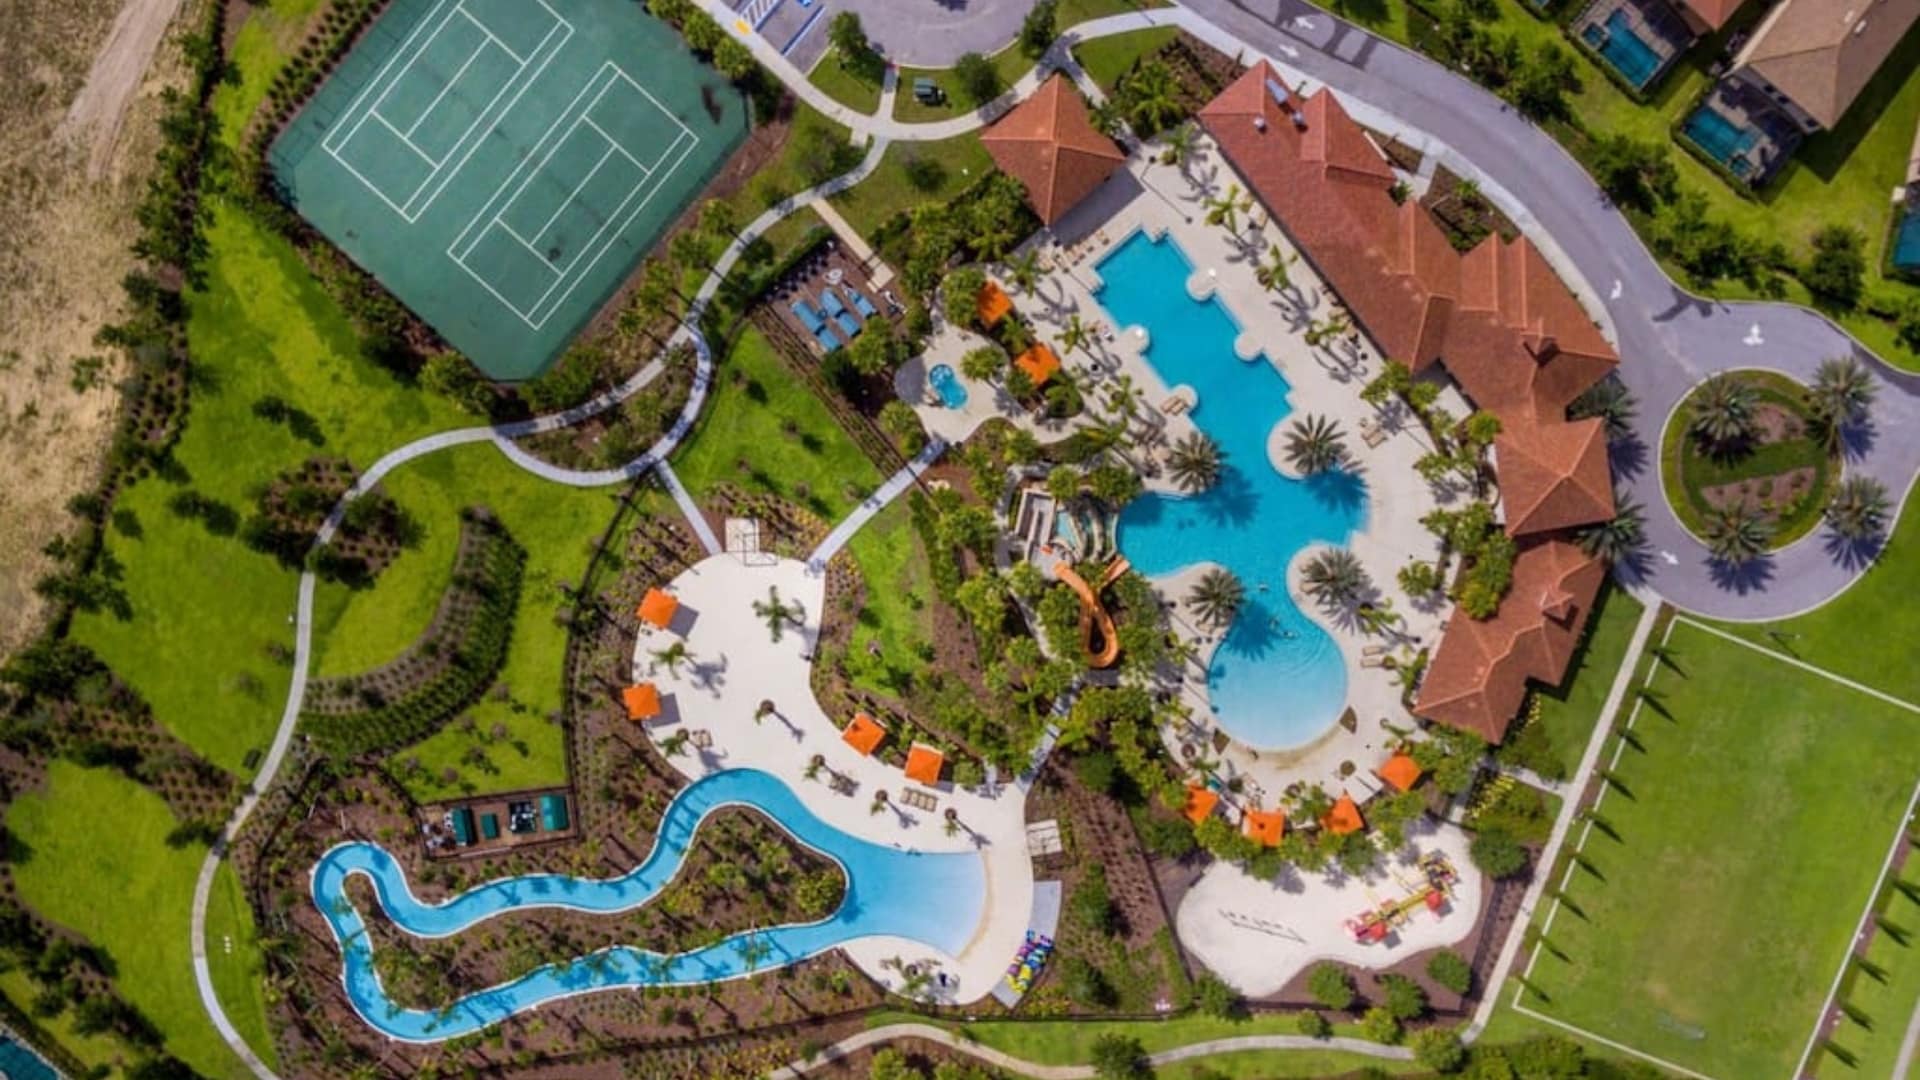 Solterra Resort Lazy River from Above